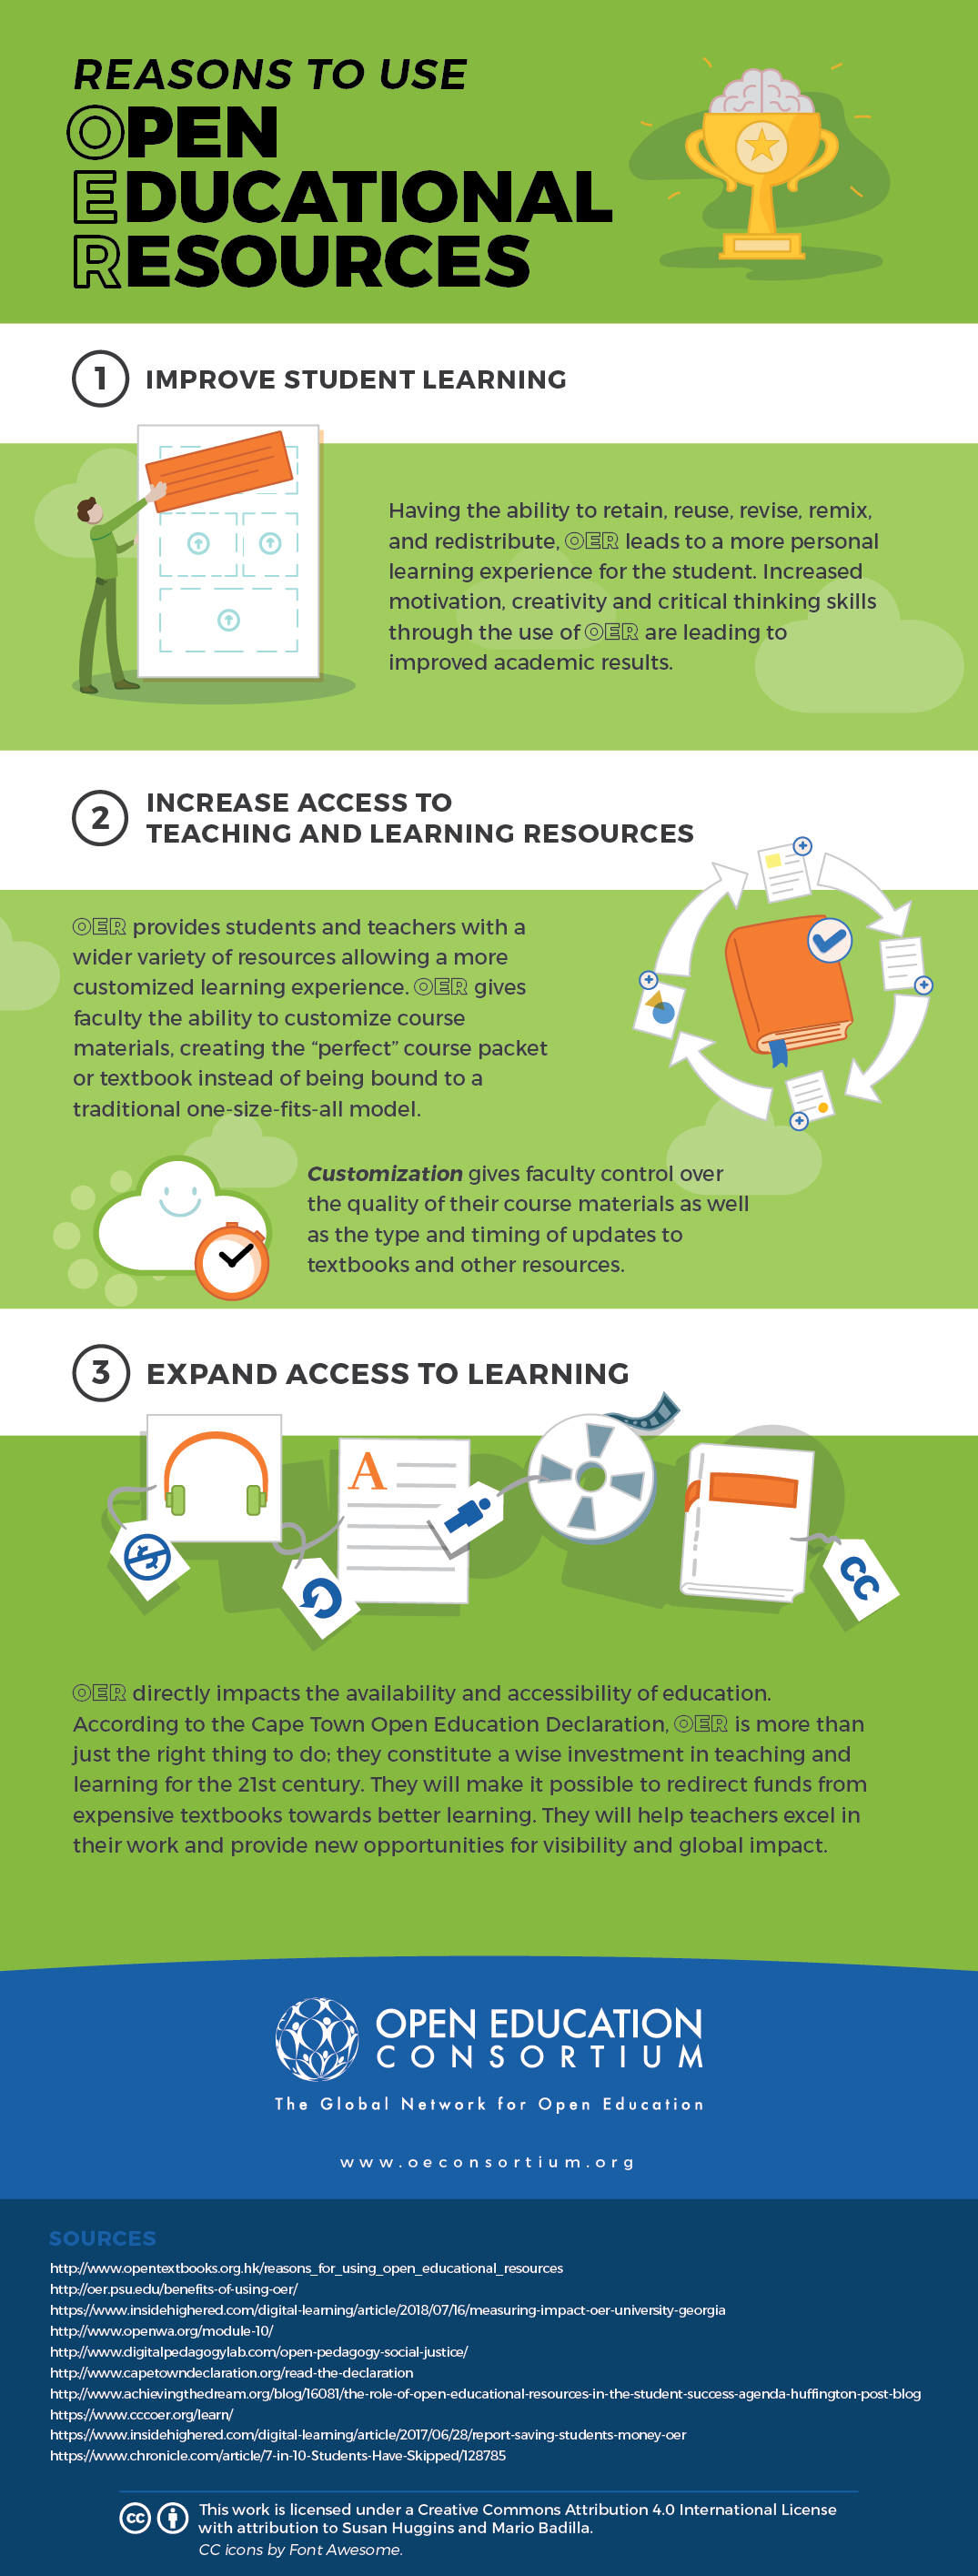 Reasons to Use OER Infographic: improve student learning, increase access to teaching and learning resources, and expand access to learning.